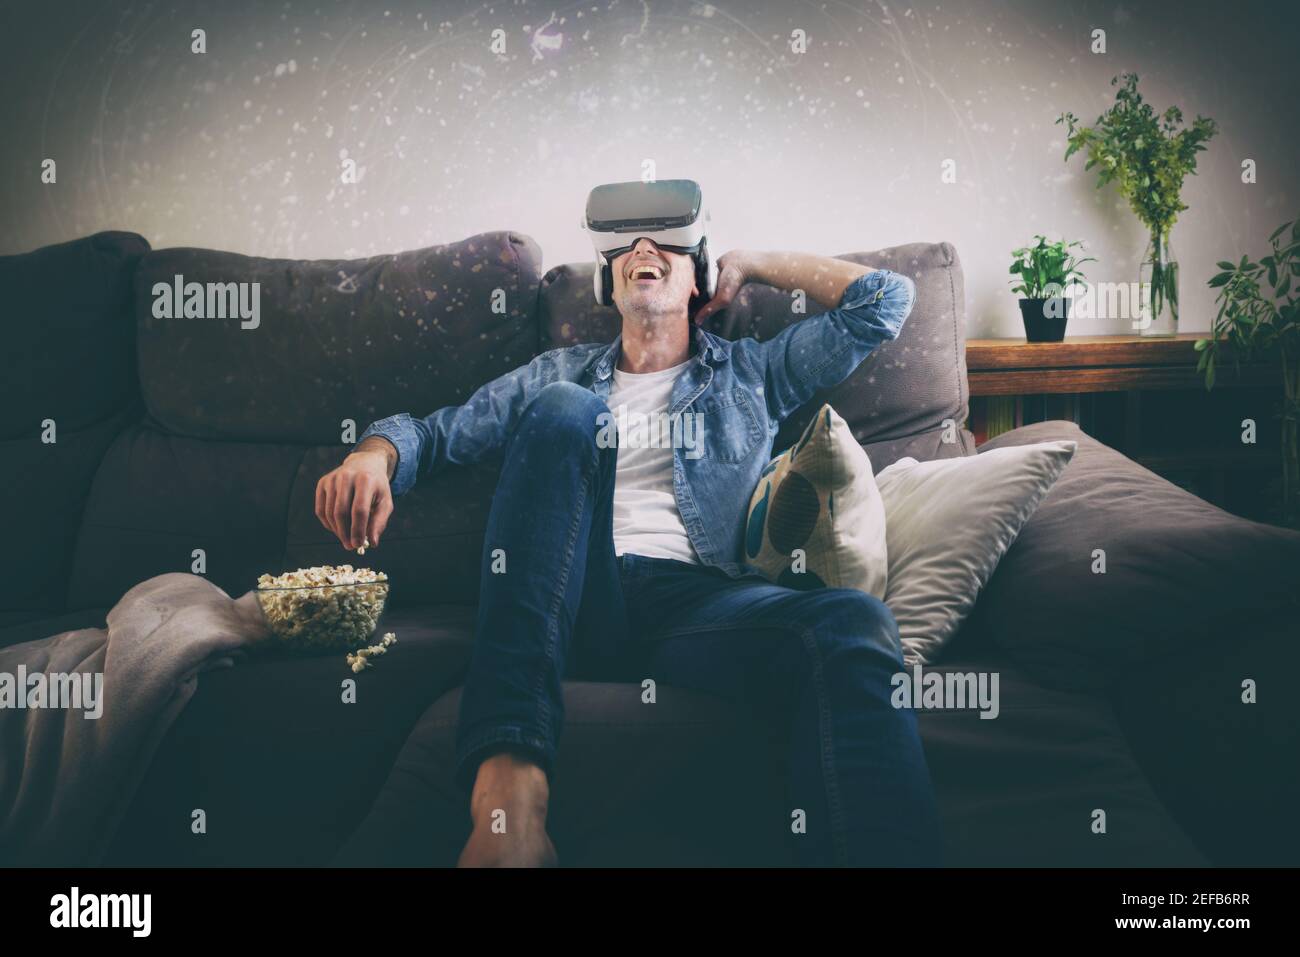 Concept of man watching content in virtual reality glasses eating popcorn on the sofa at home Stock Photo